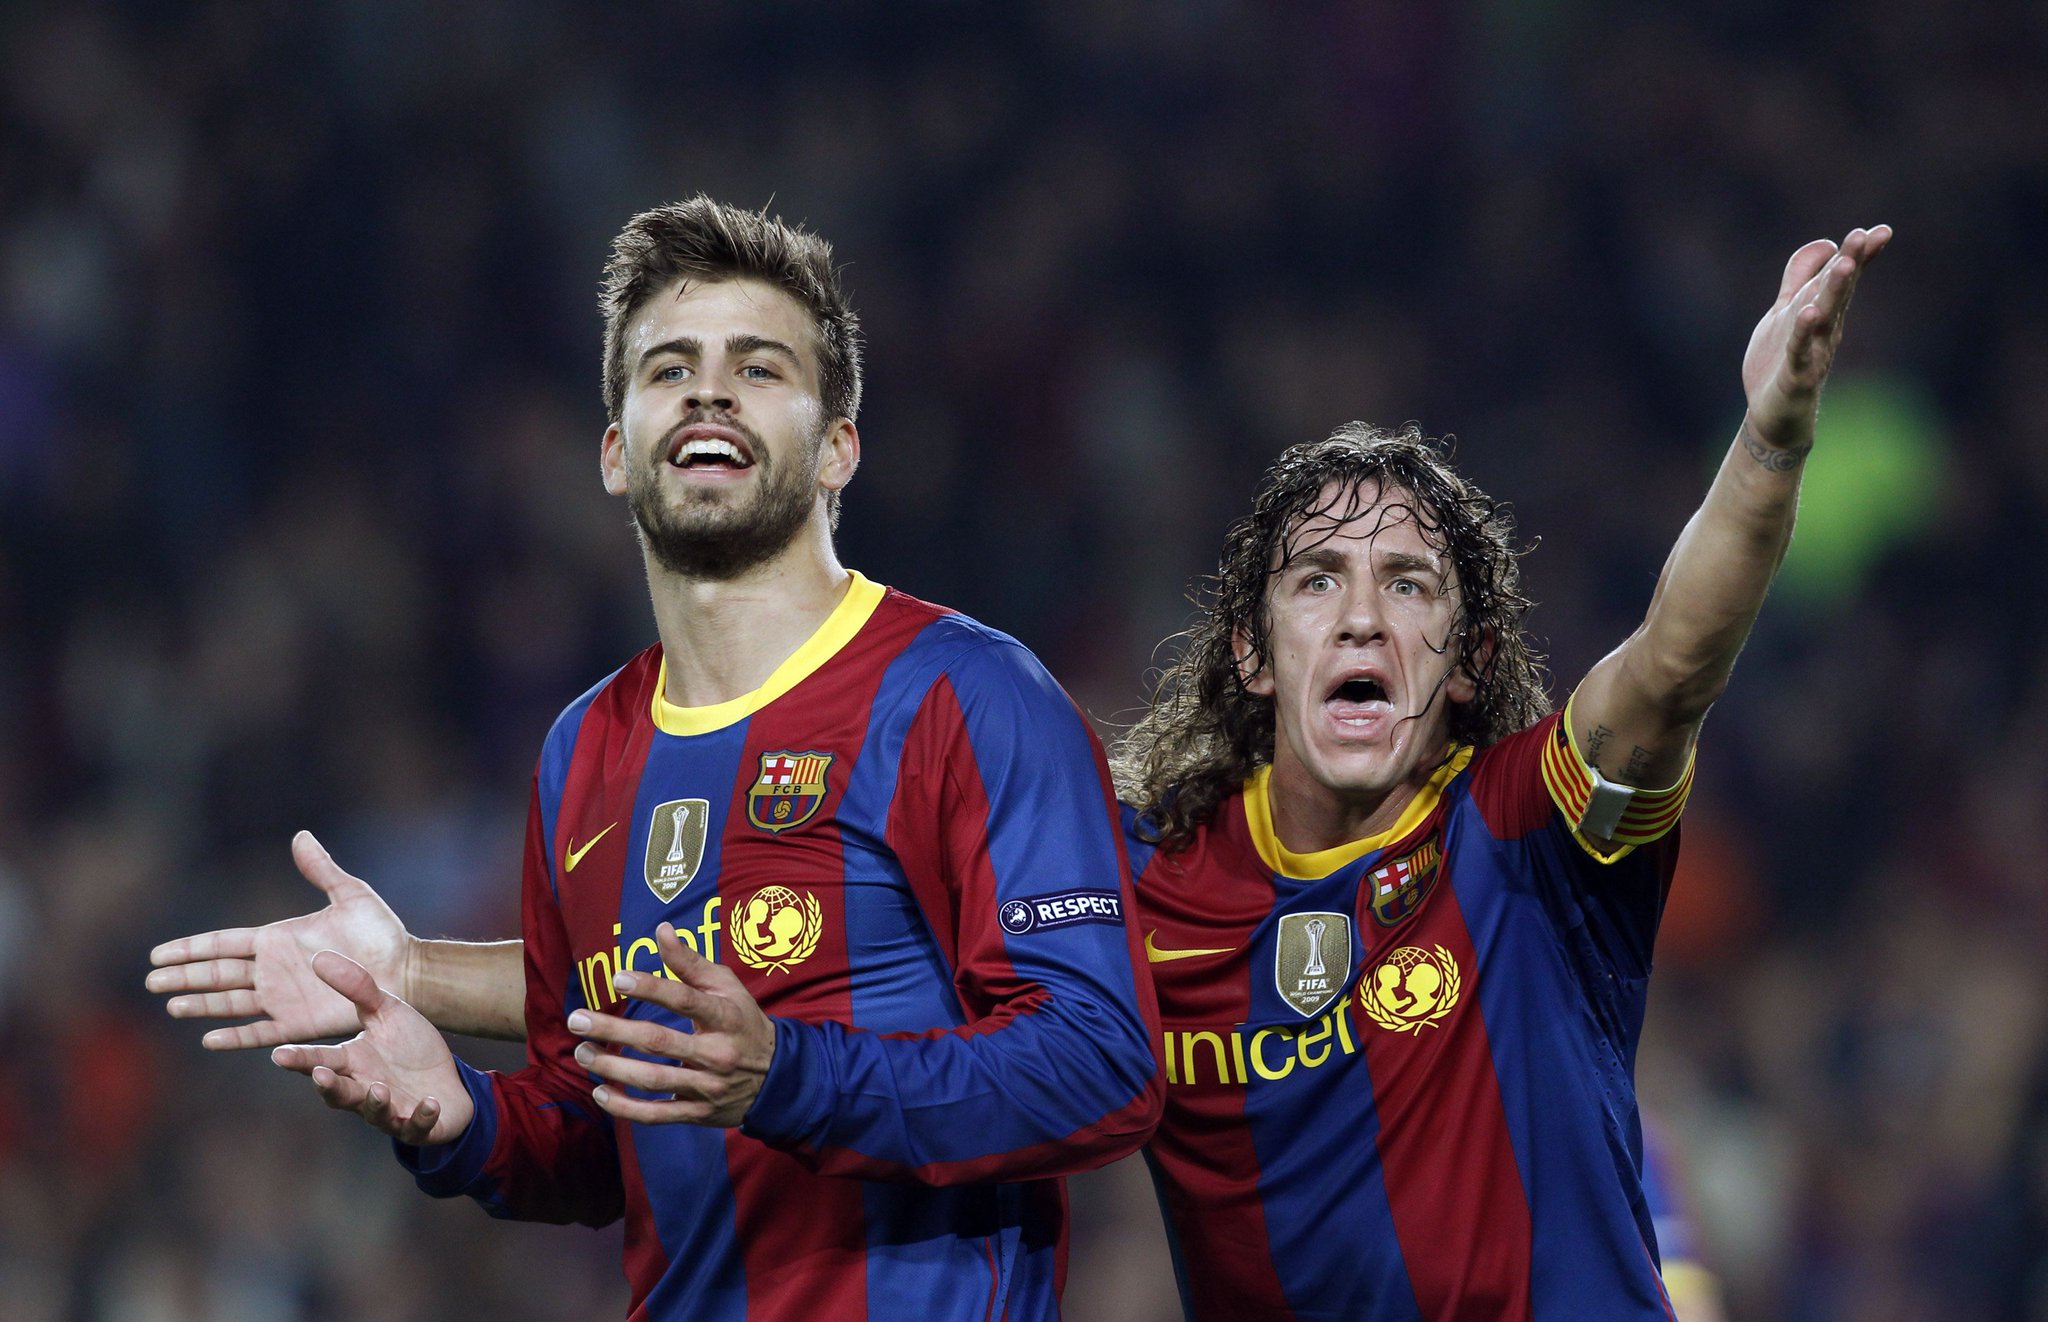  Happy Birthday Gerard Piqué

Where do these two rank in the all-time best centre-back partnerships? 